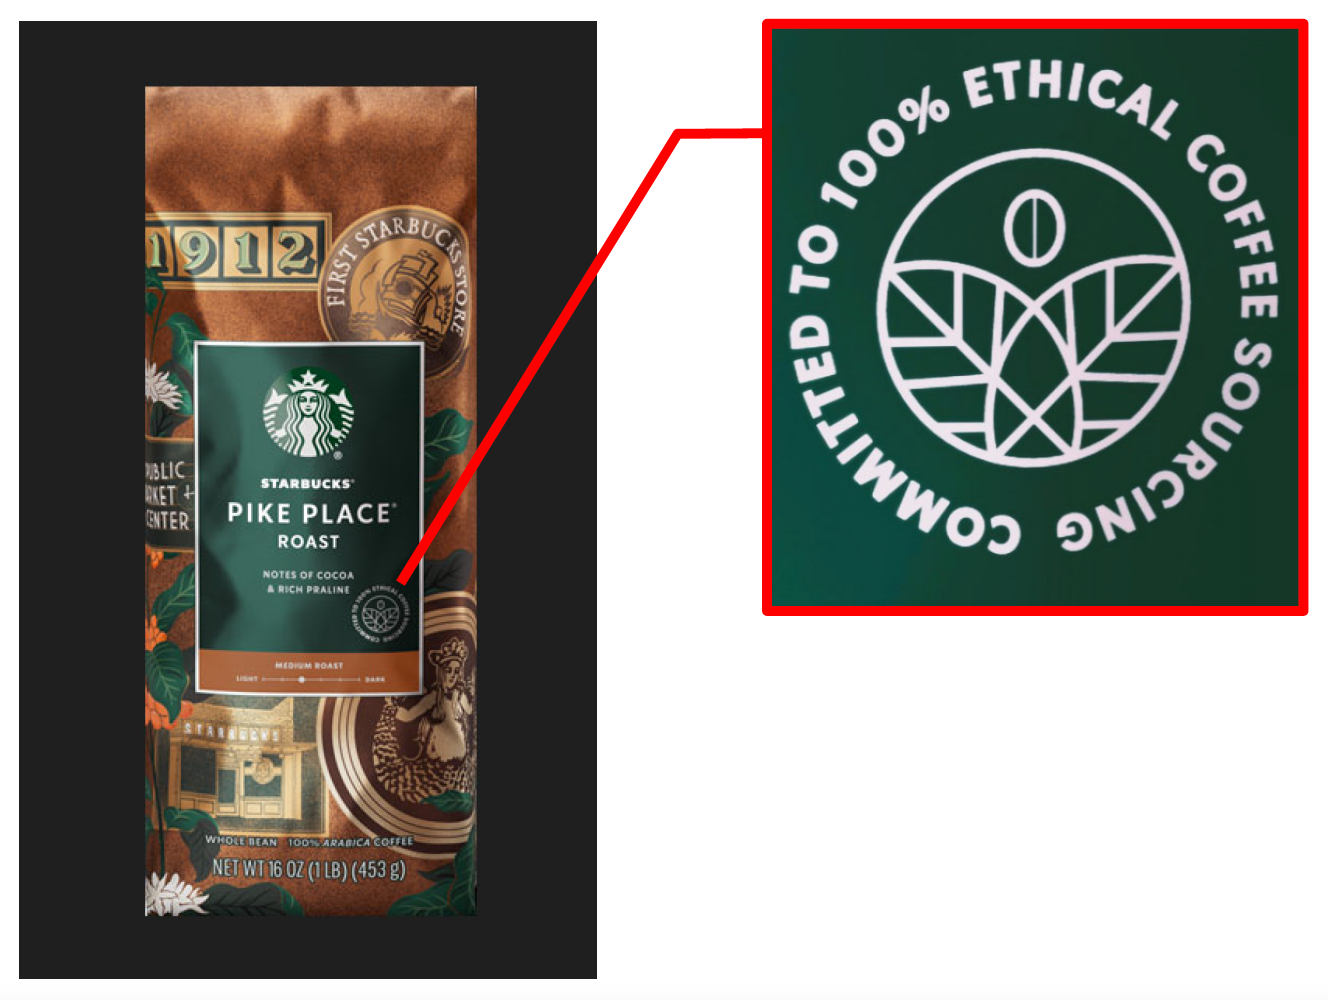 Starbucks' Ethically Sourced Coffee and Tea Claims - Truth in